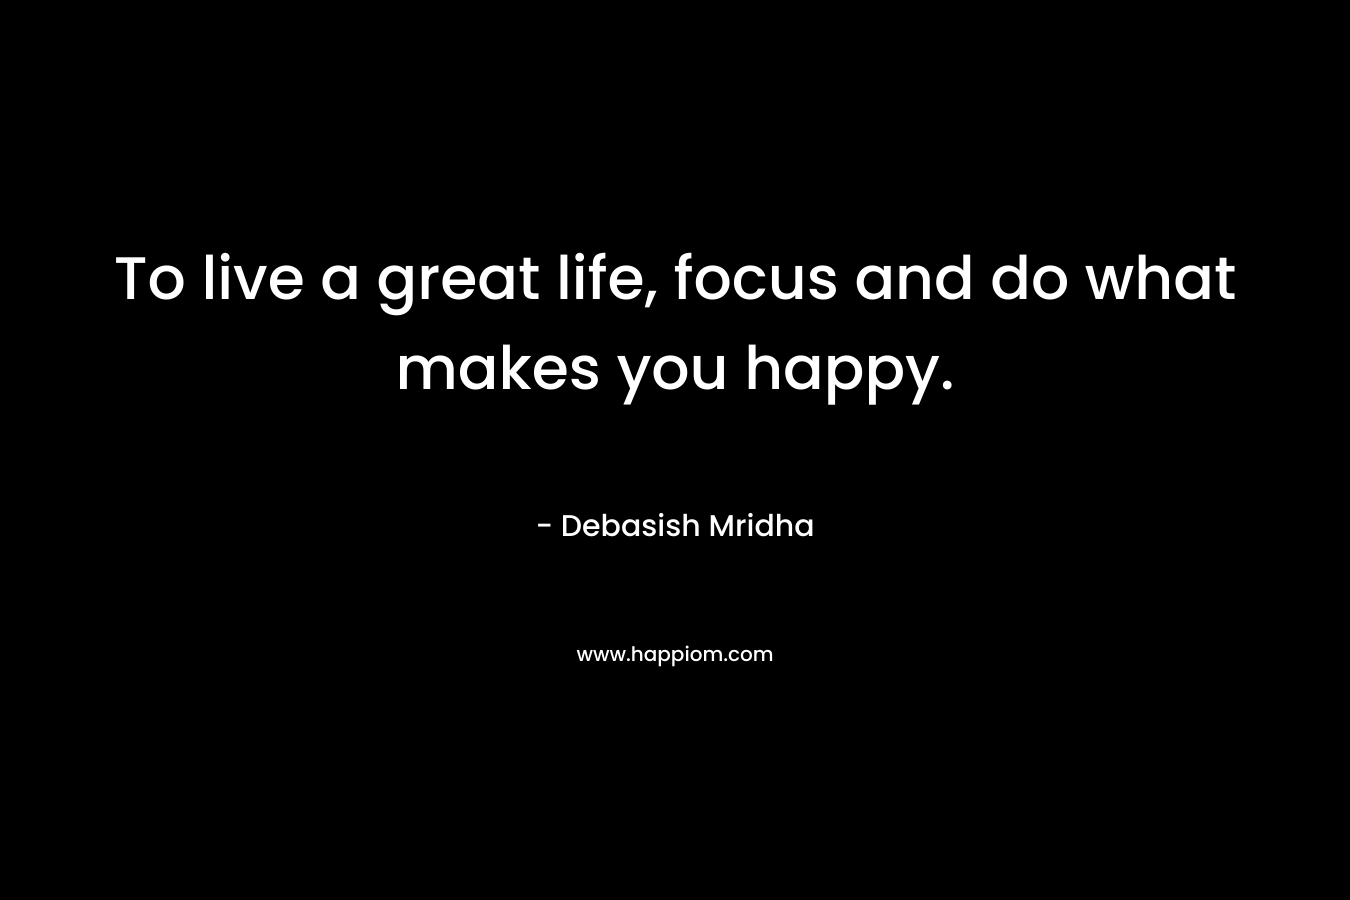 To live a great life, focus and do what makes you happy.